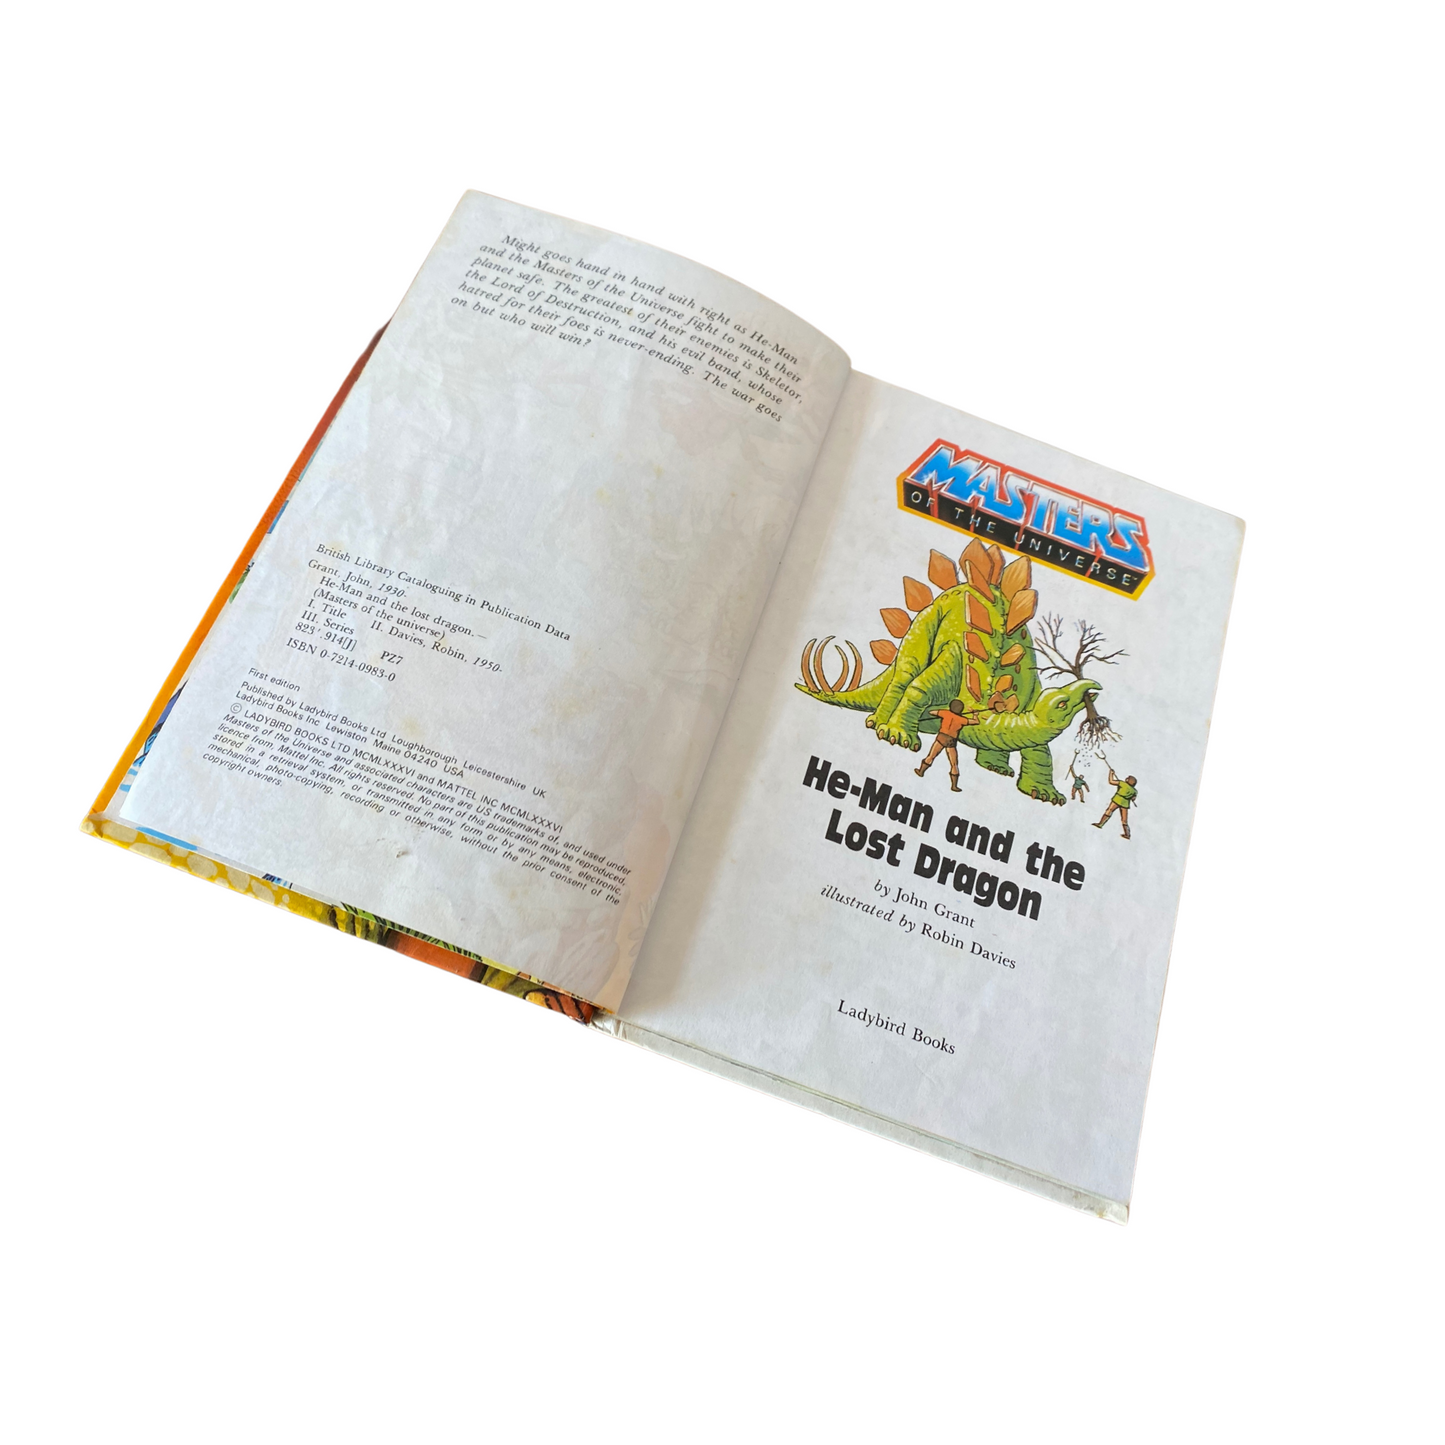 First edition He-Man story book printed in England by John Grant